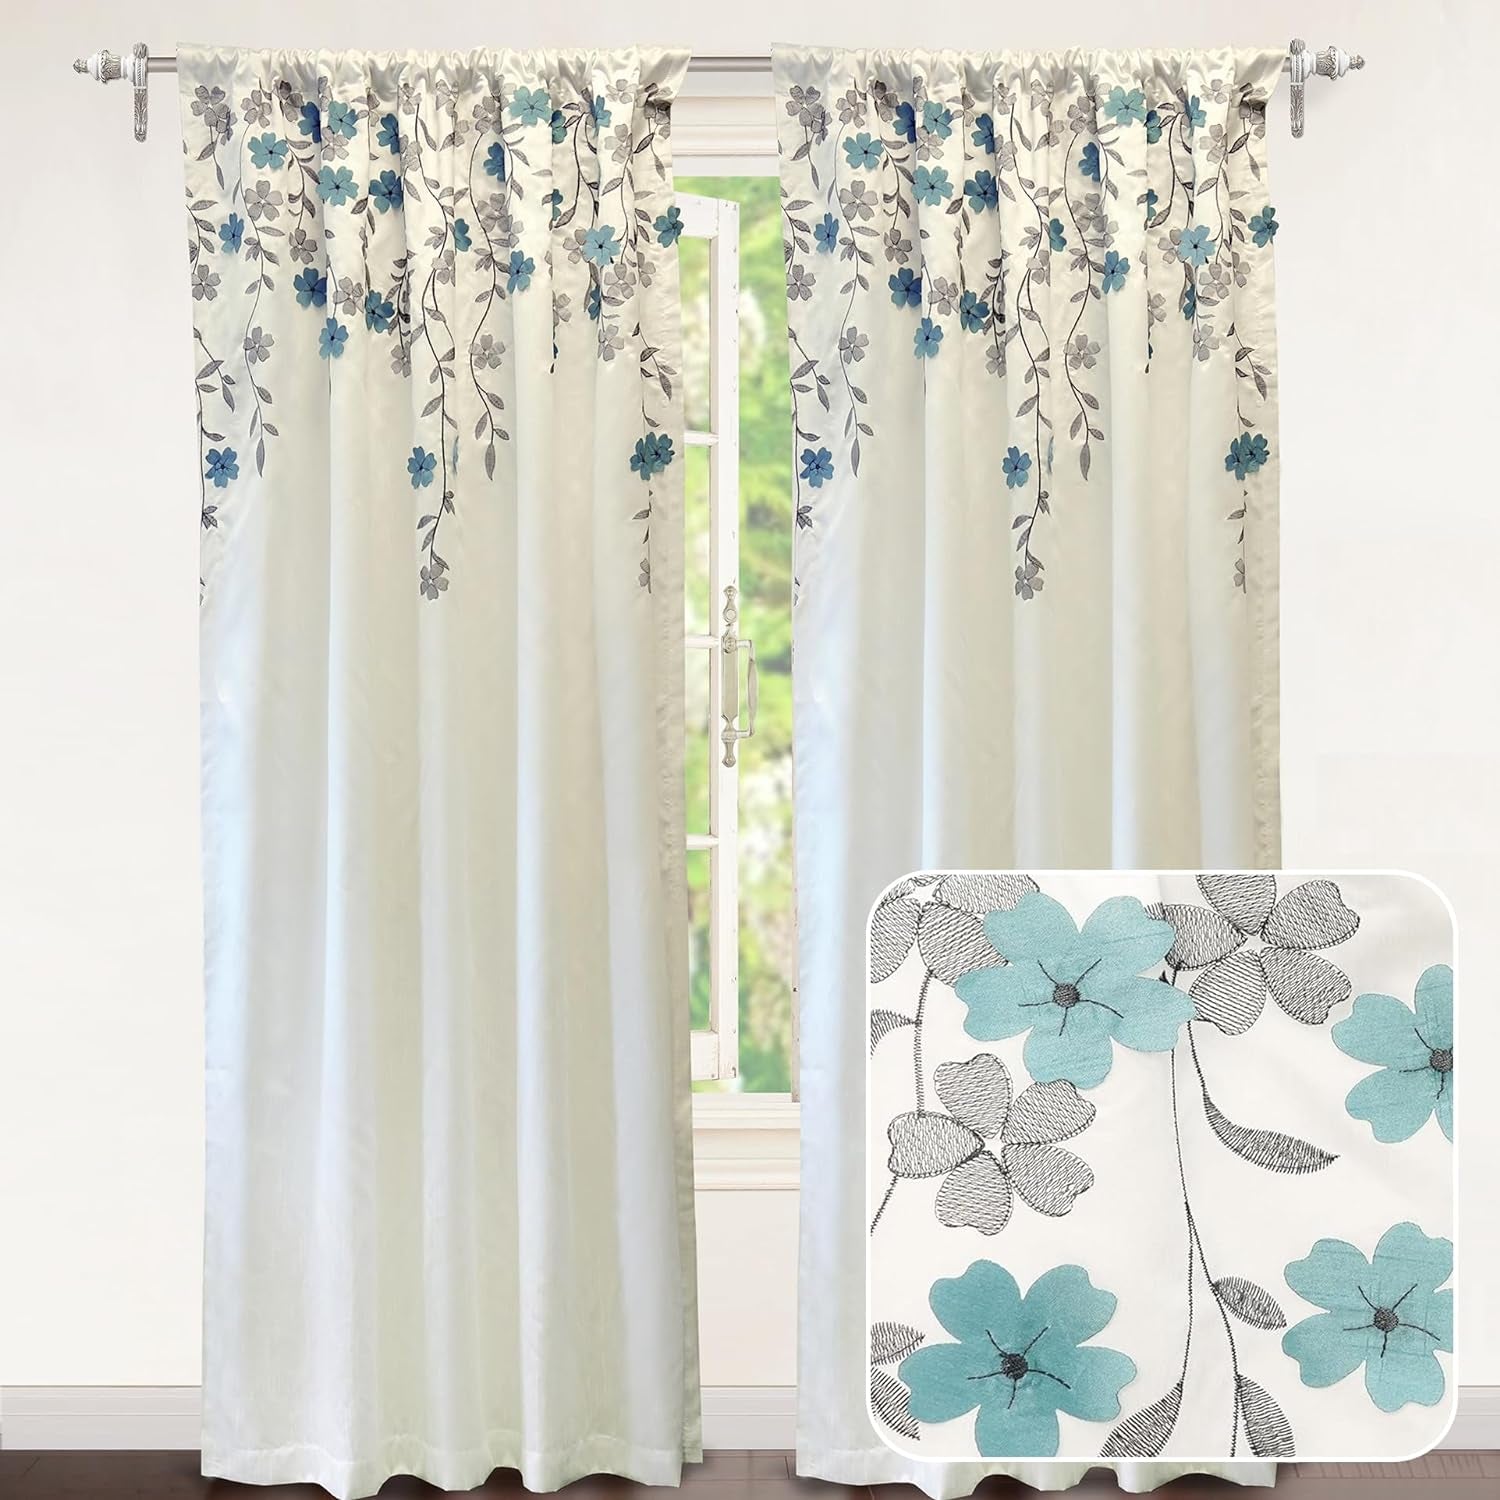 Driftaway Aubree Weeping Flower Print Thermal Room Darkening Privacy Window Curtain for Bedroom Living Room Rod Pocket 2 Panels 52 Inch by 84 Inch Blue  DriftAway Two Panels Ivory Blue 50”X84” 